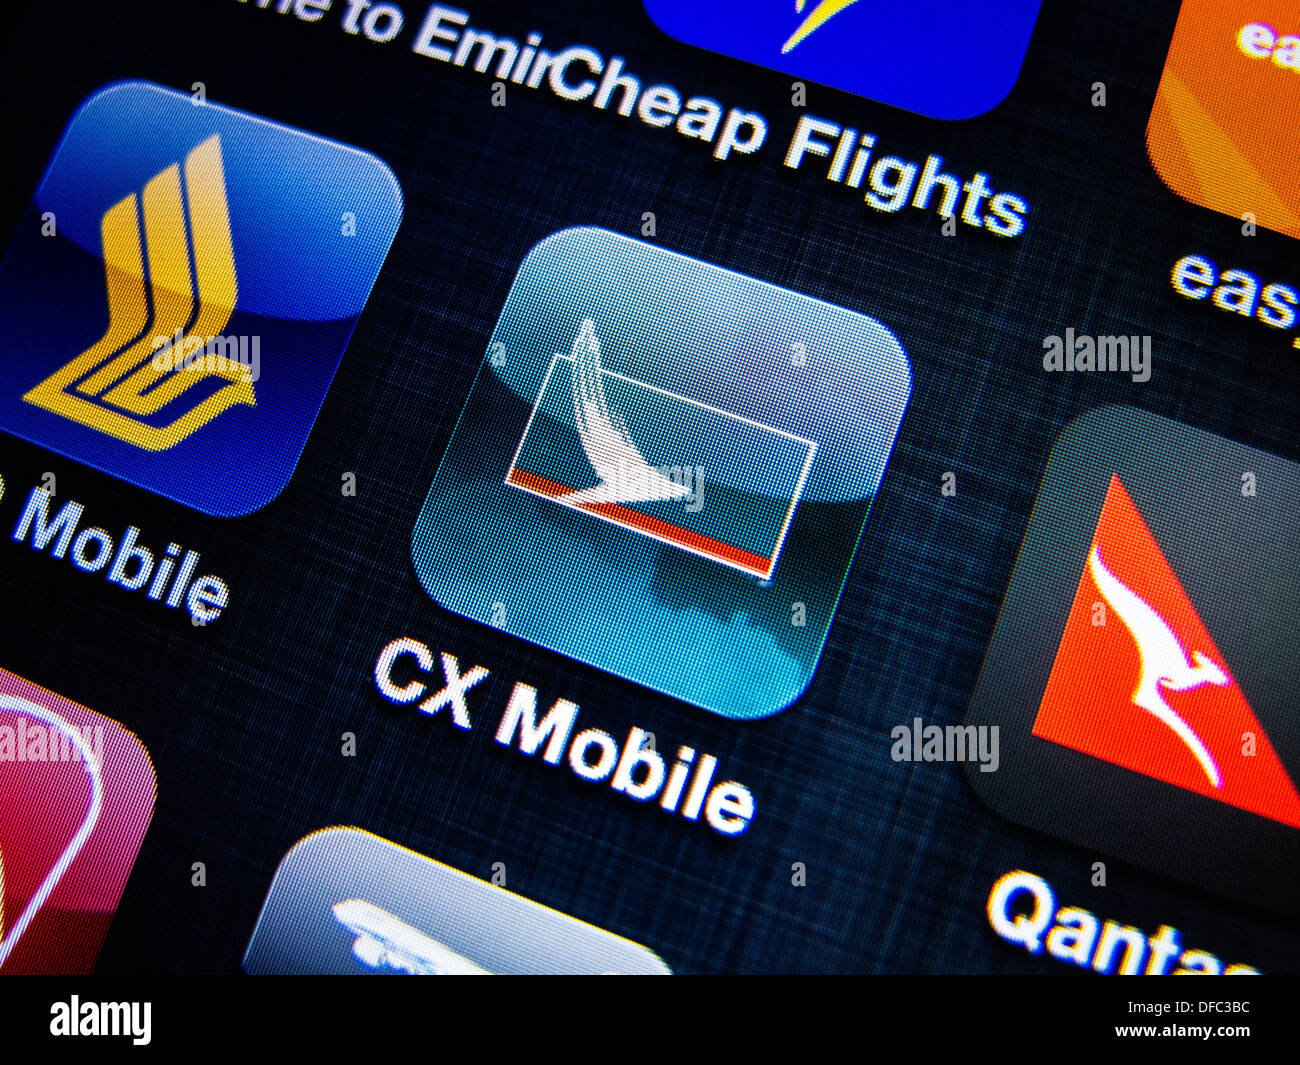 detail of Cathay Pacific airline app icon on mobile phone screen Stock Photo